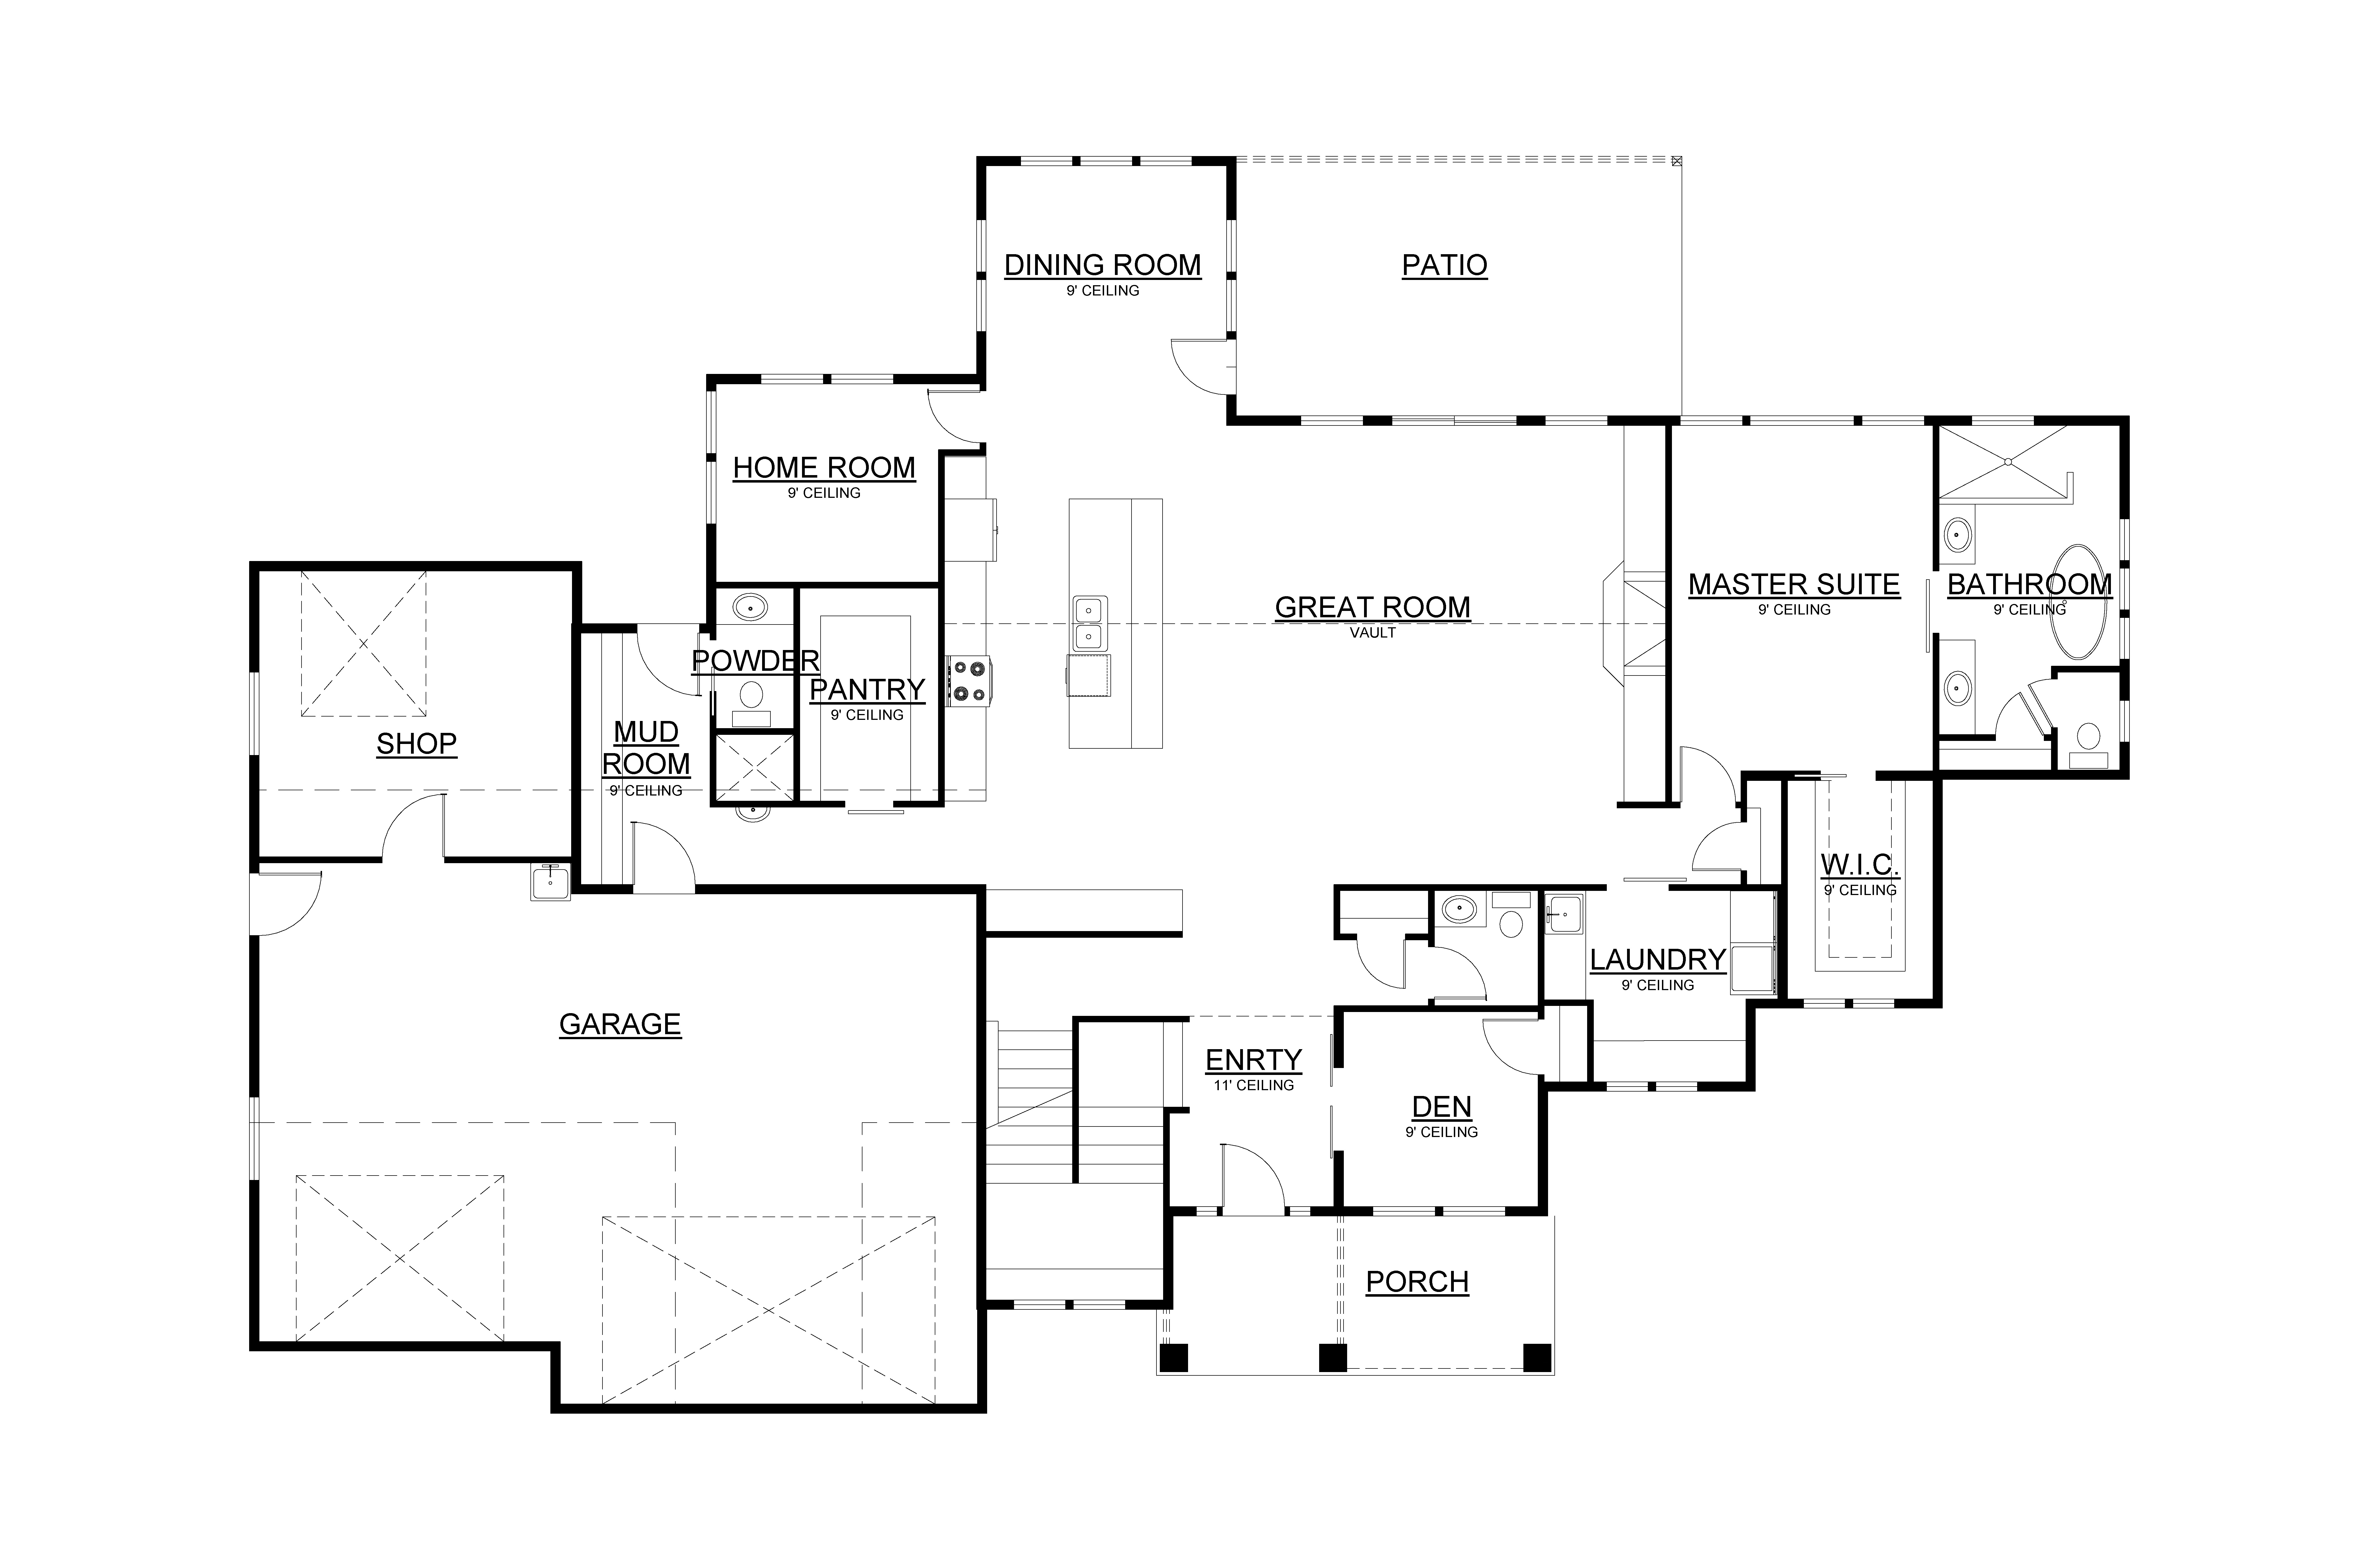 A detailed floor plan of the stanton.